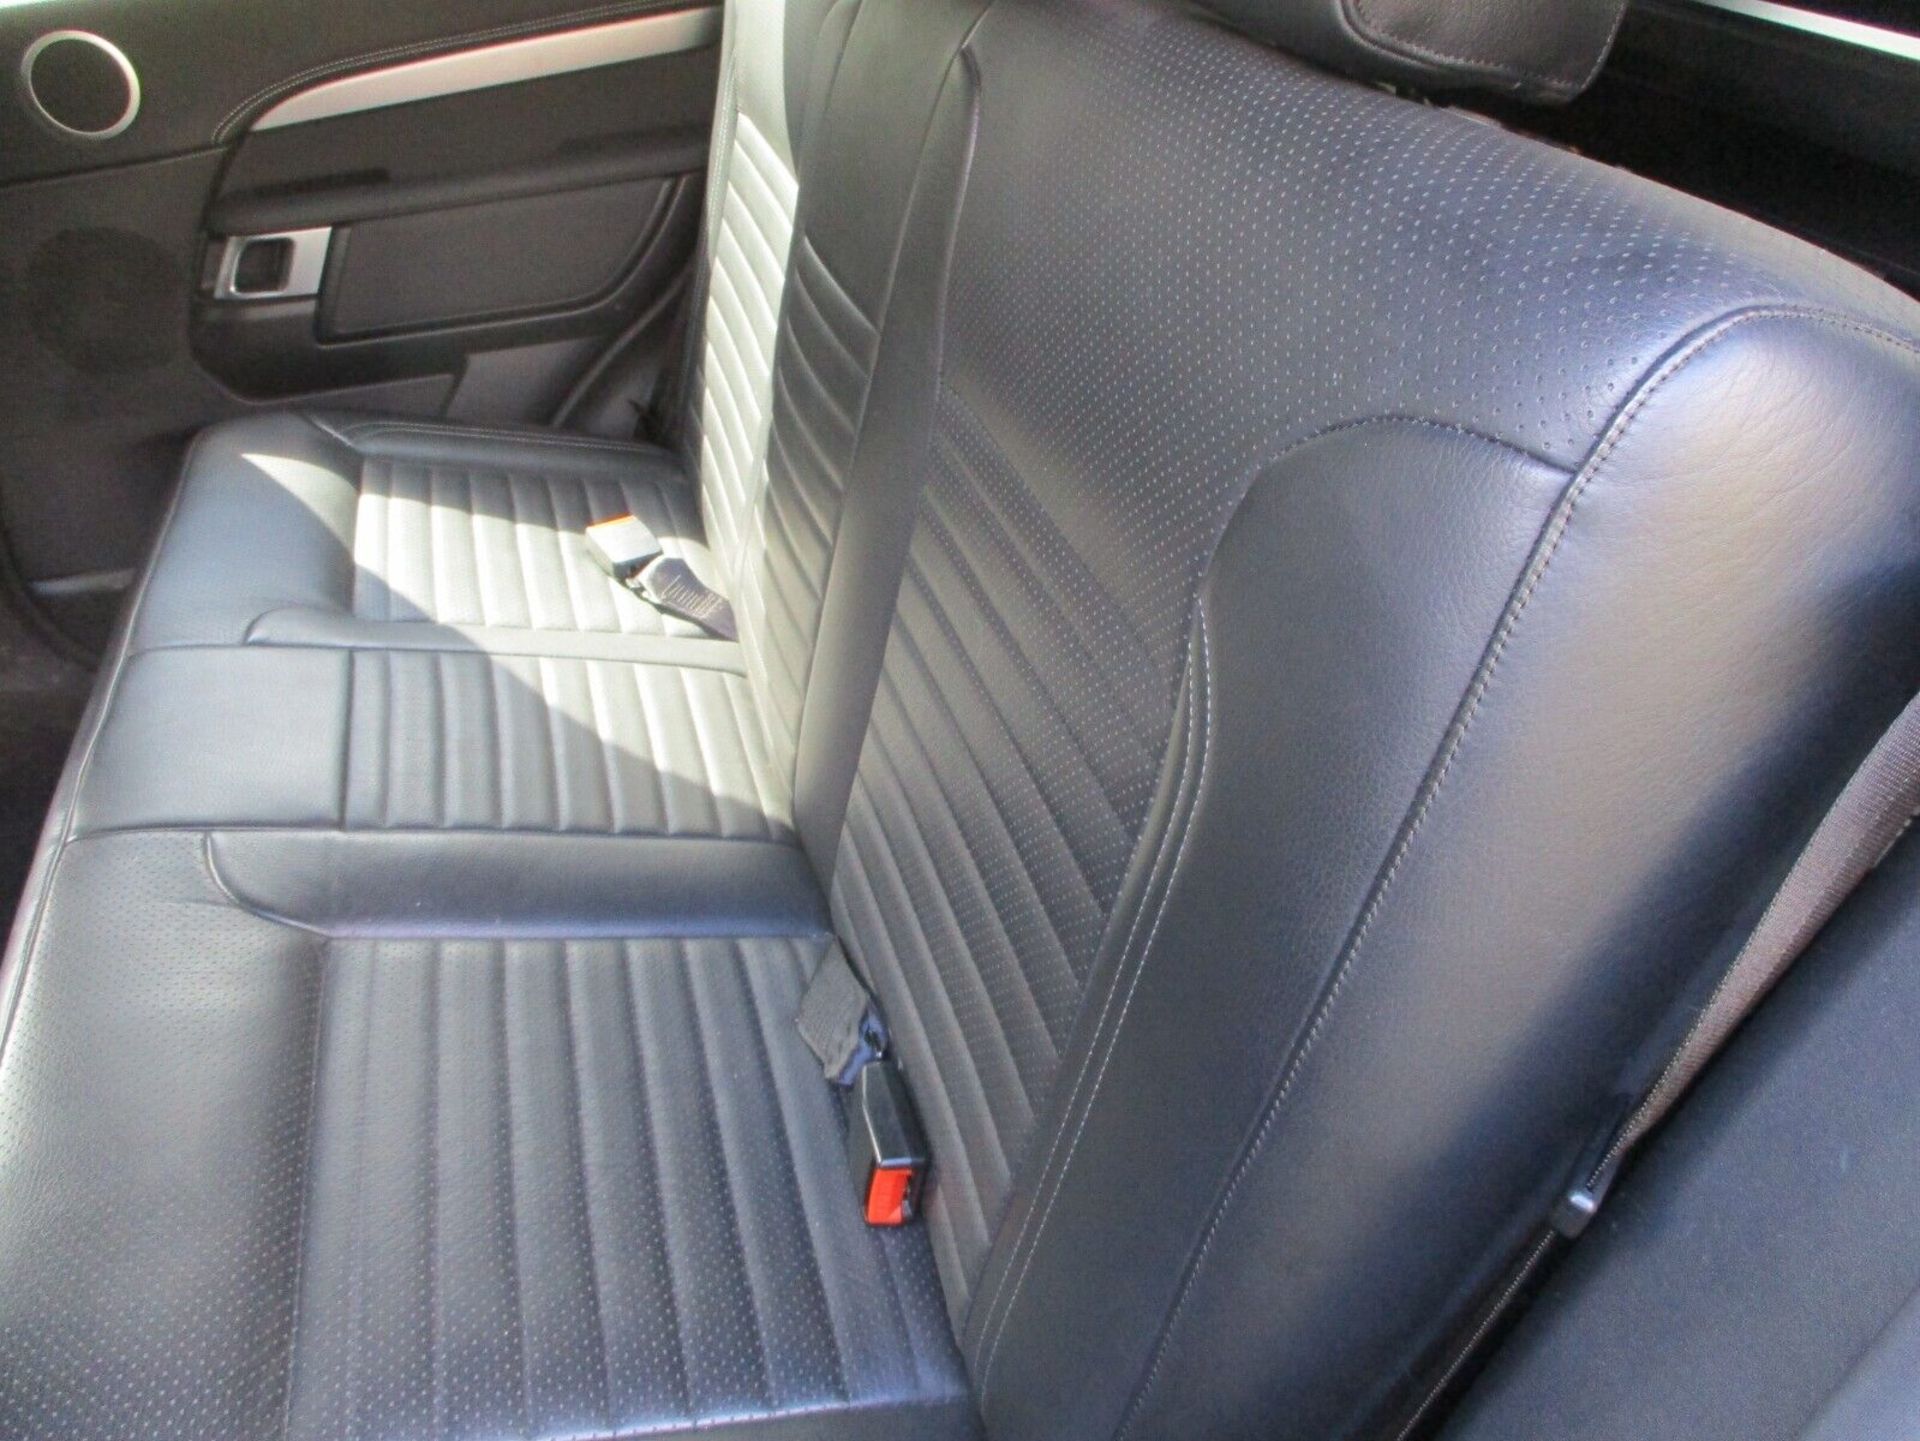 2022 LAND ROVER DISCOVERY R DYNAMIC HSE - RARE REAR SEAT CONVERSION - IMMACULATE CONDITION! - Image 14 of 18